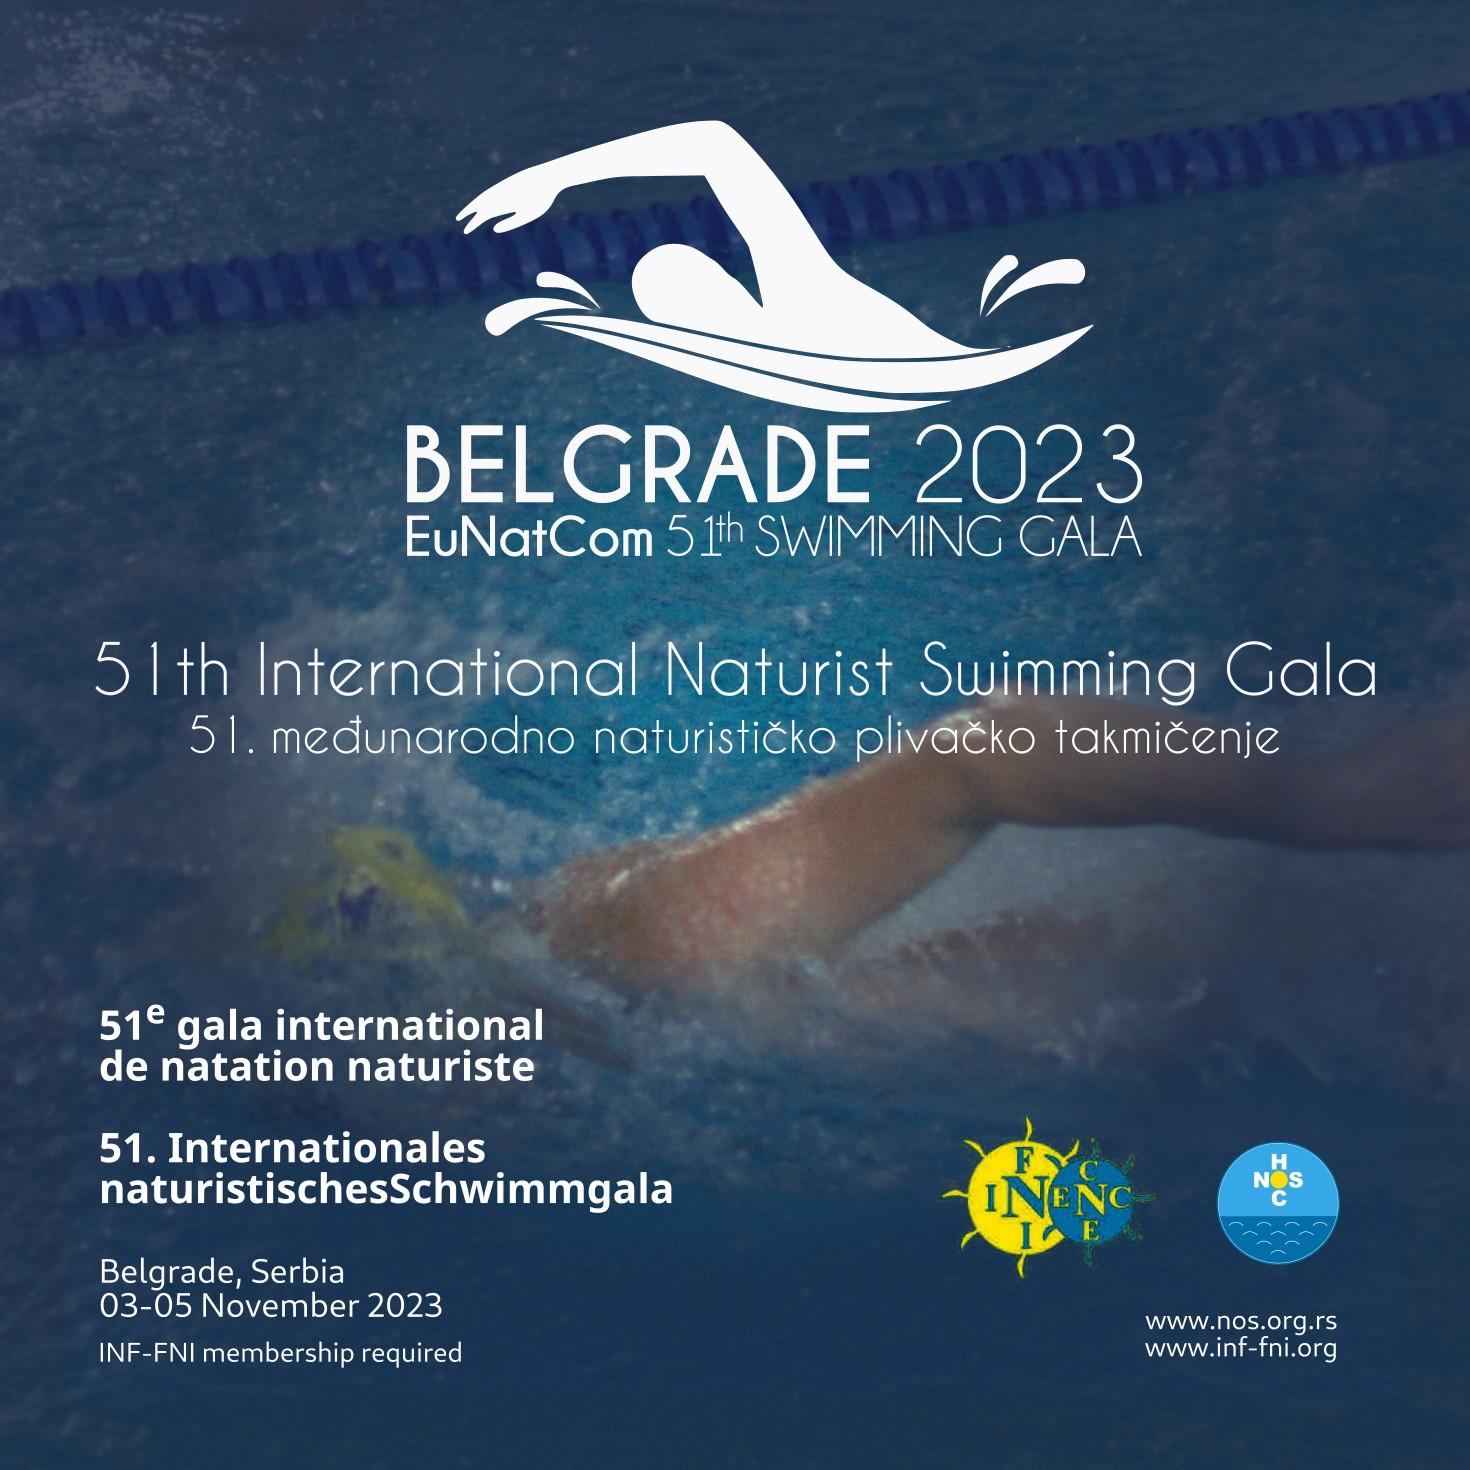 Belgrade is hosting the international naturist swimming competition Swimming Gala 2023 for the second time